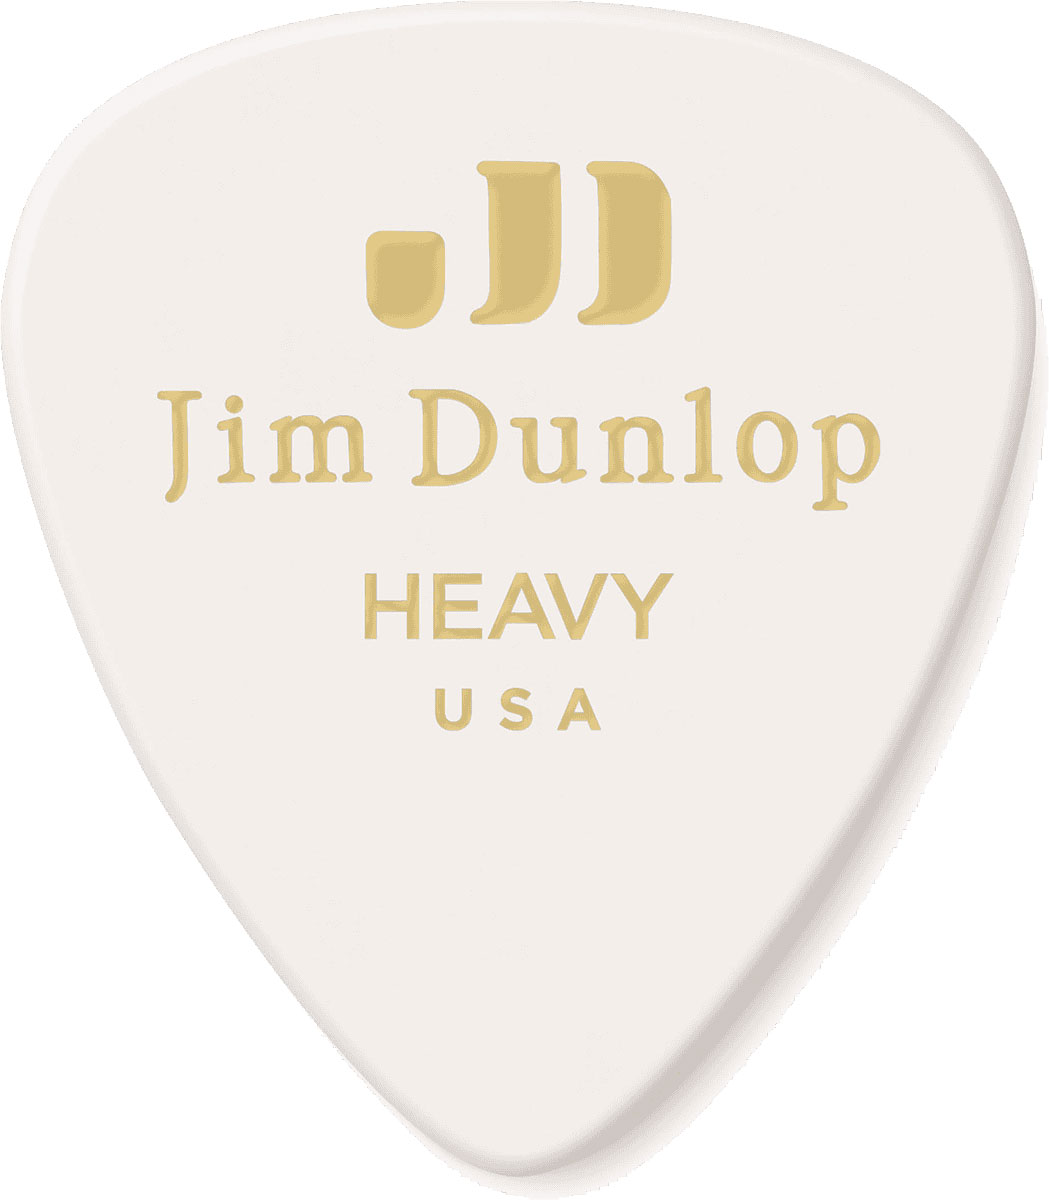 JIM DUNLOP GENUINE CELLULOID CLASSIC, PLAYER'S PACK OF 12, WHITE, HEAVY